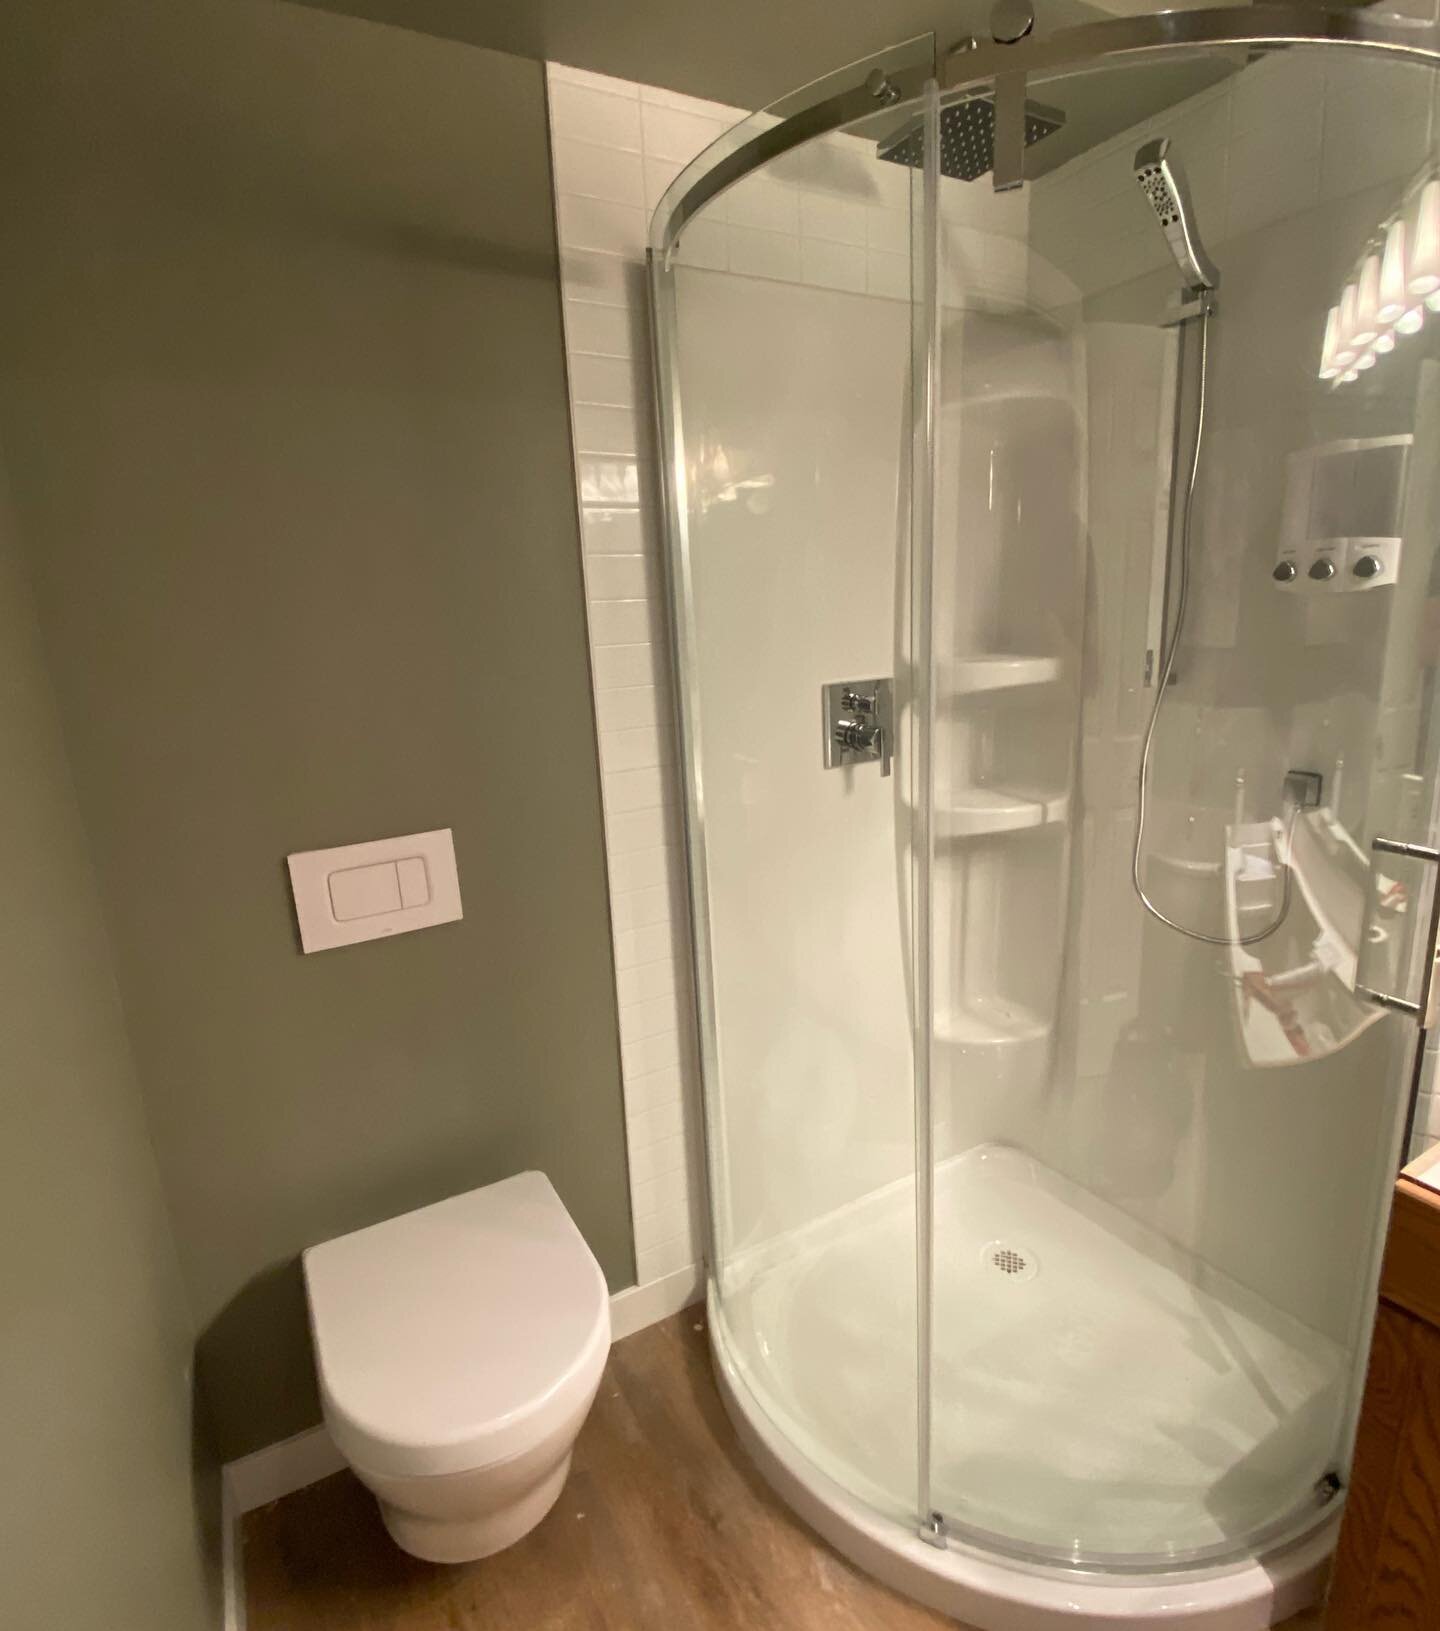 We finished a renovation project the other day for an awesome client! 
&bull;
Revamped the client&rsquo;s main floor bathroom by adding a new freestanding tub, a stand-in shower, a wall-hung toilet and vanity! 
&bull;
We also did a full mechanical ro